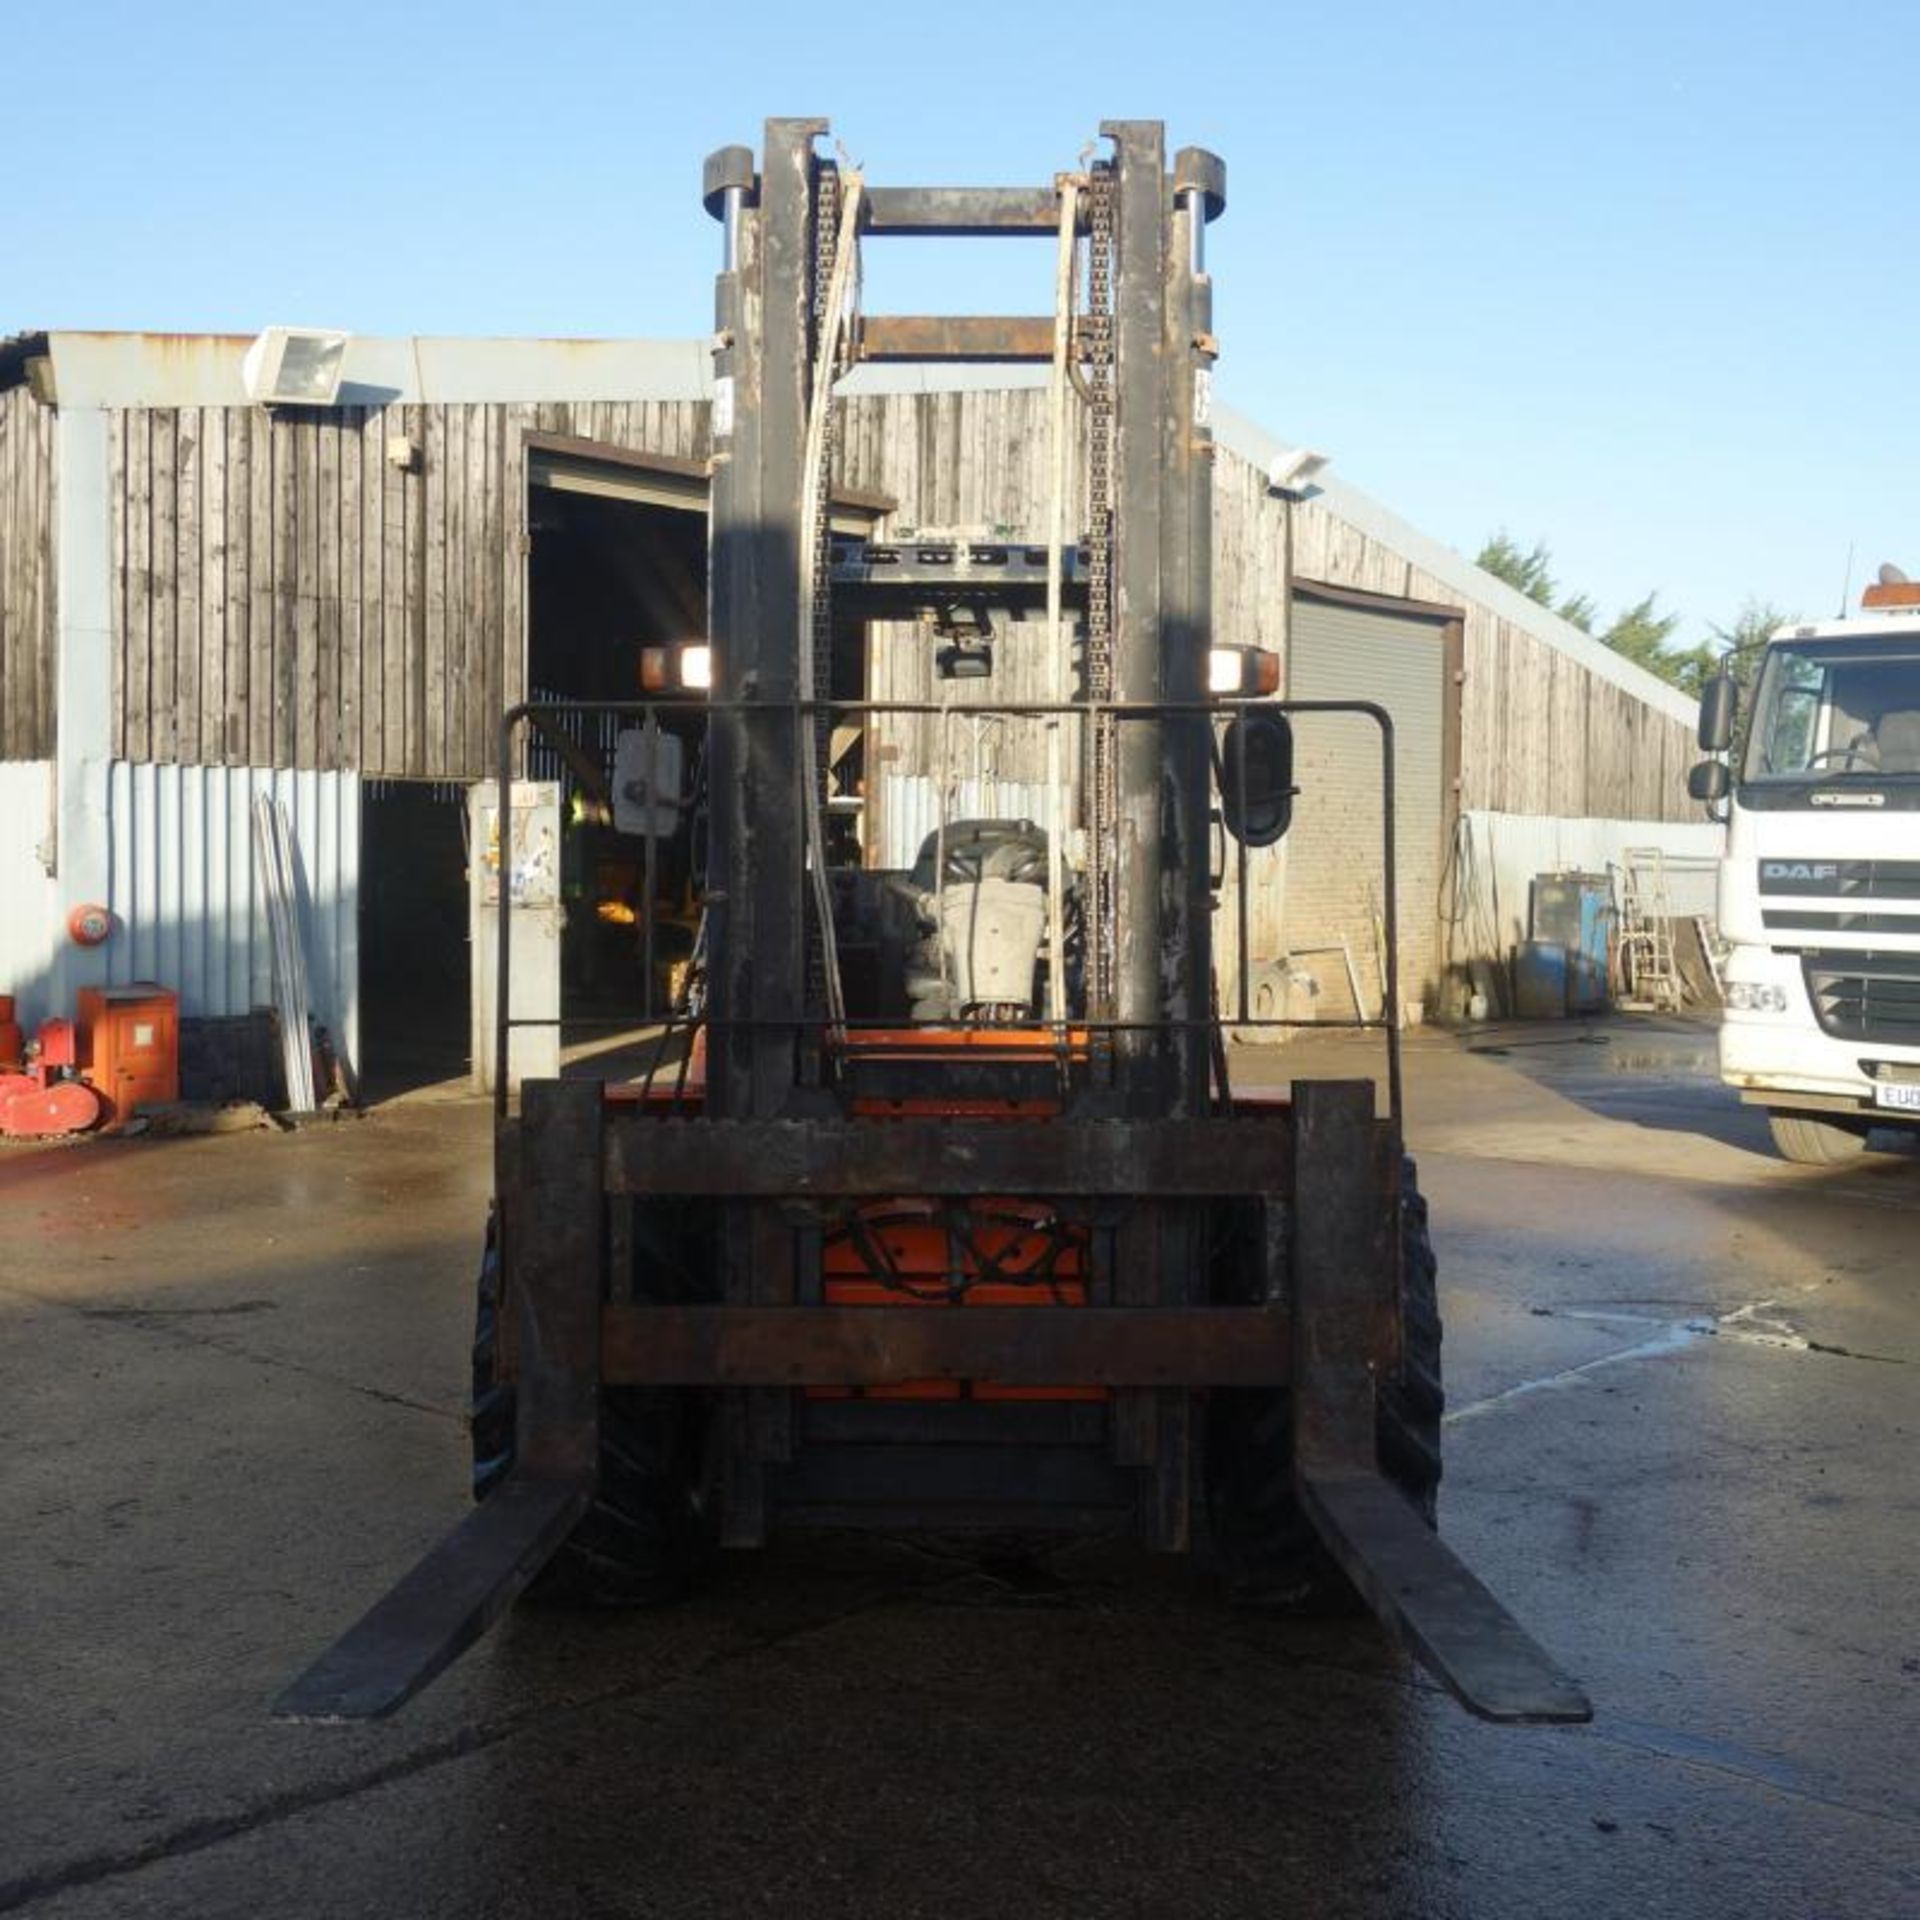 2011 MAST H50DA 4WD 5 Tonne 4x4 Forklift, Two Stage Mask - Image 5 of 11